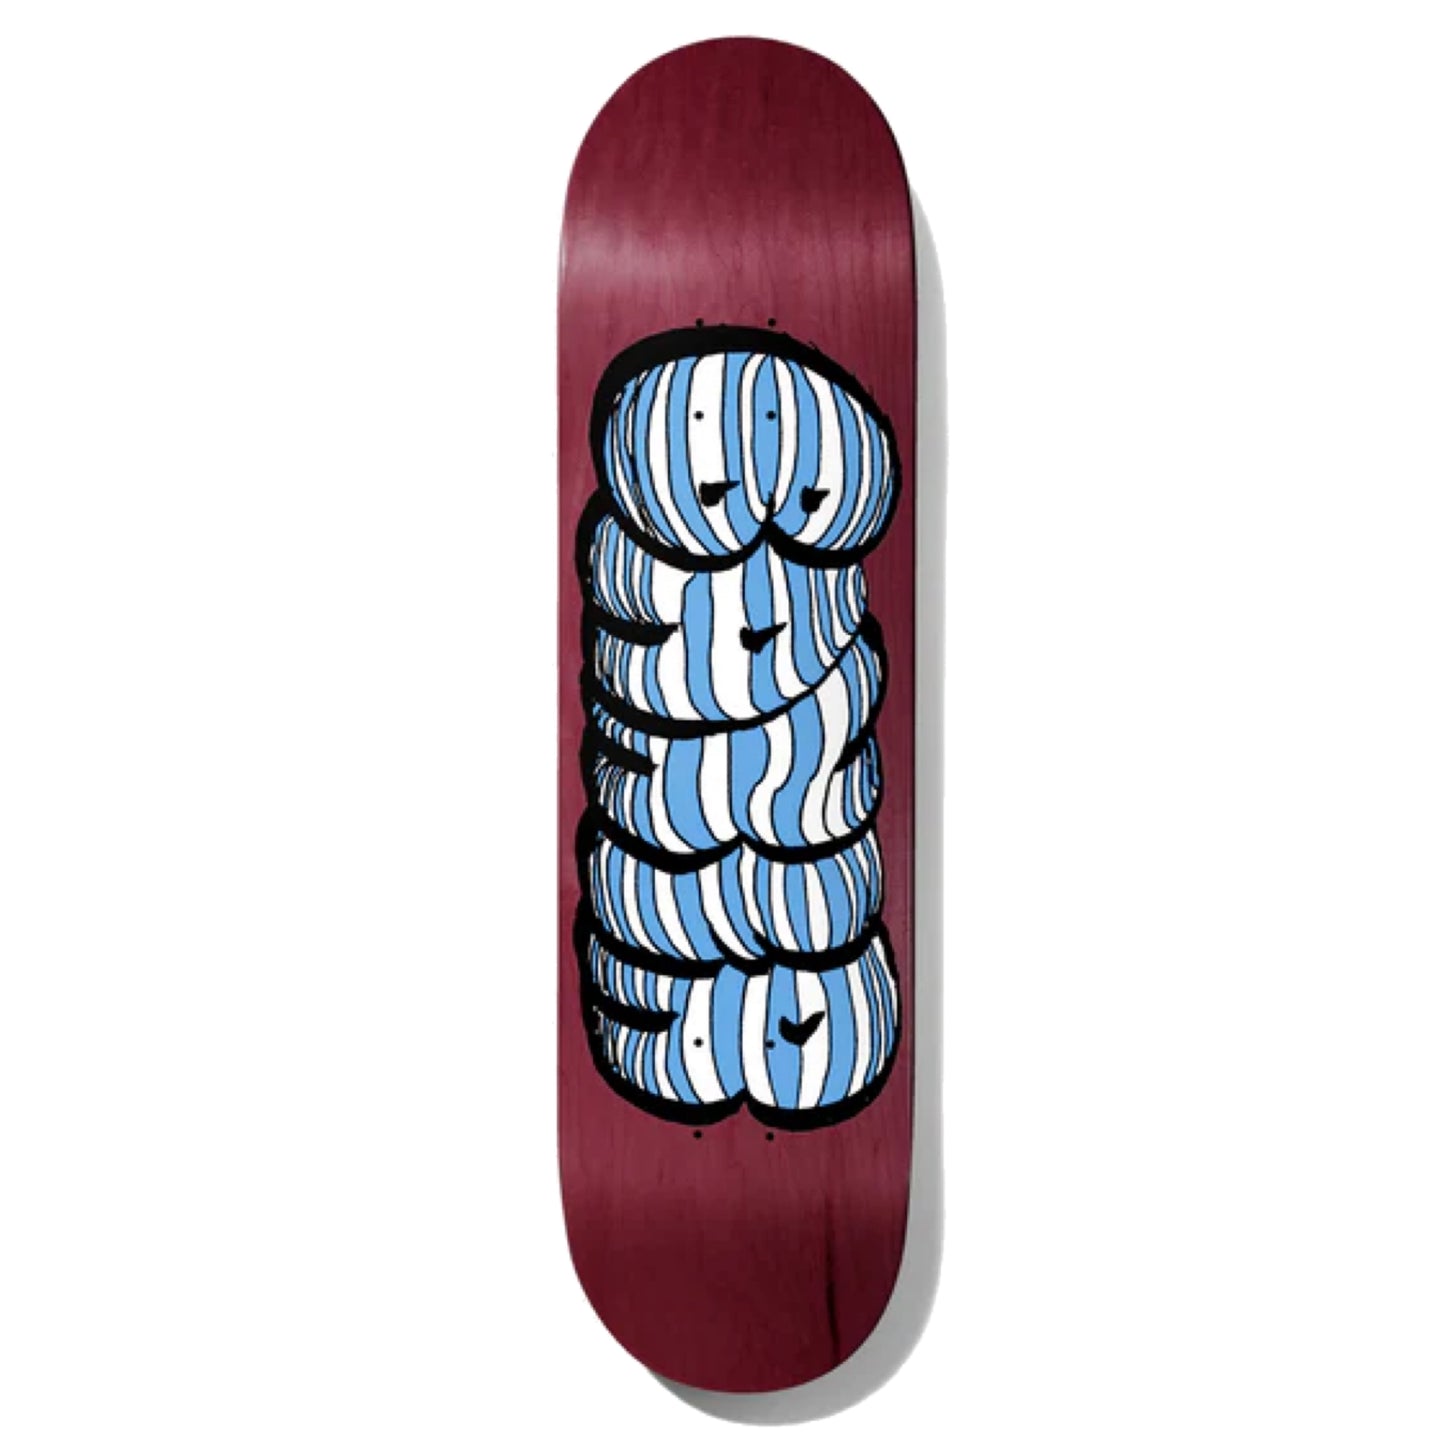 Baker Rowan Bubbler Skateboard Deck; Burgundy background with blue and white striped text spelling out "Baker" in big bubble letters